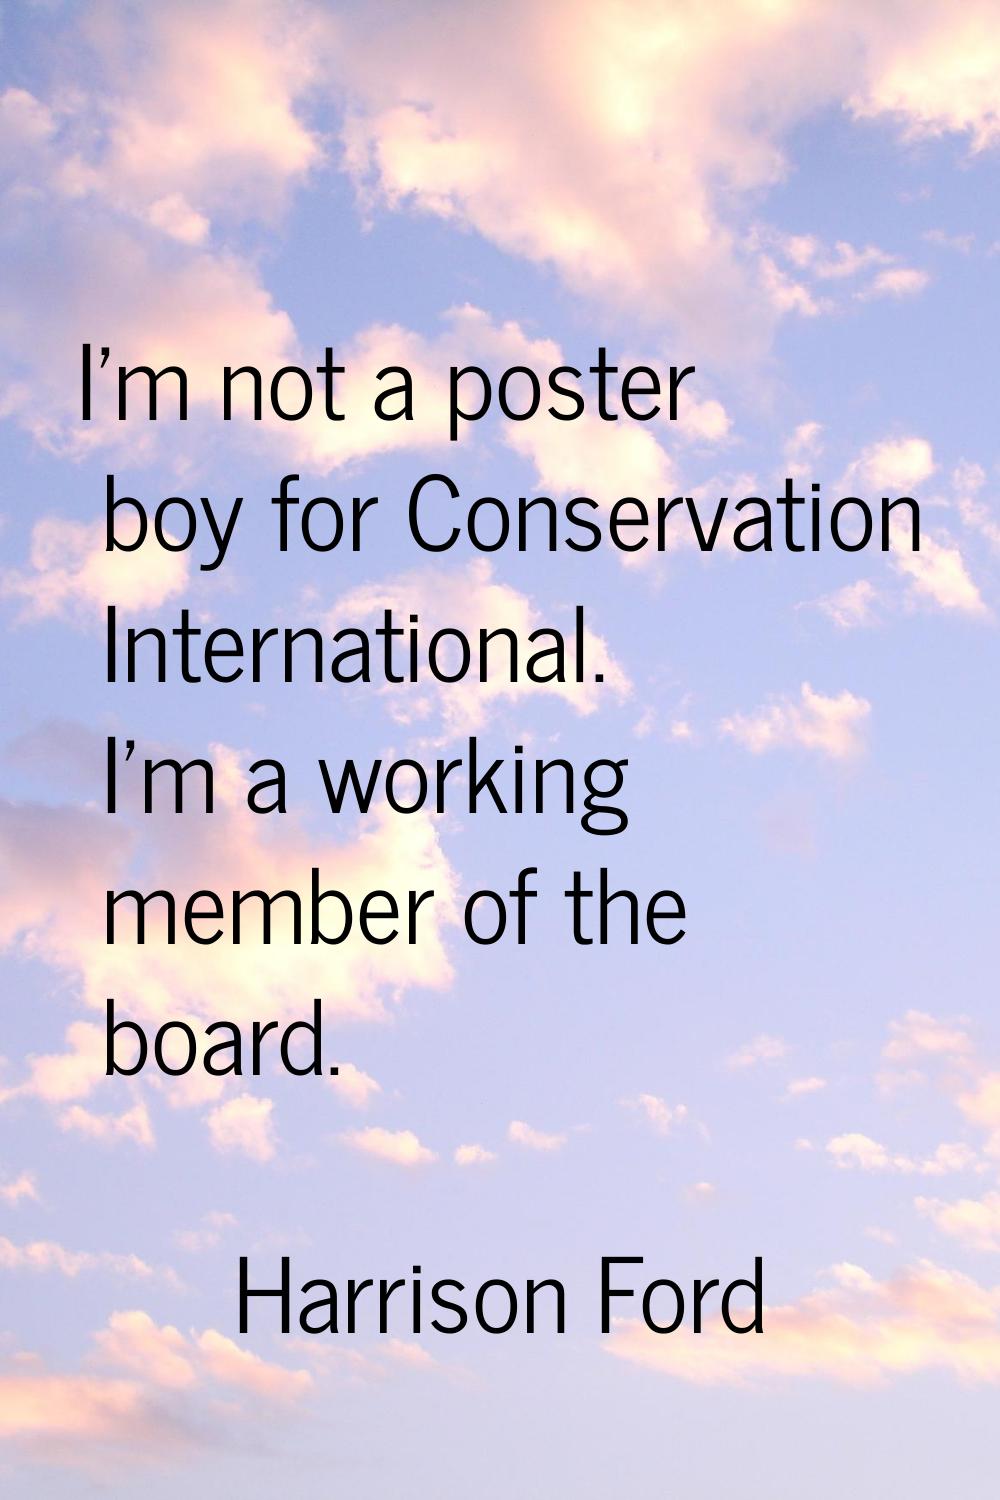 I'm not a poster boy for Conservation International. I'm a working member of the board.